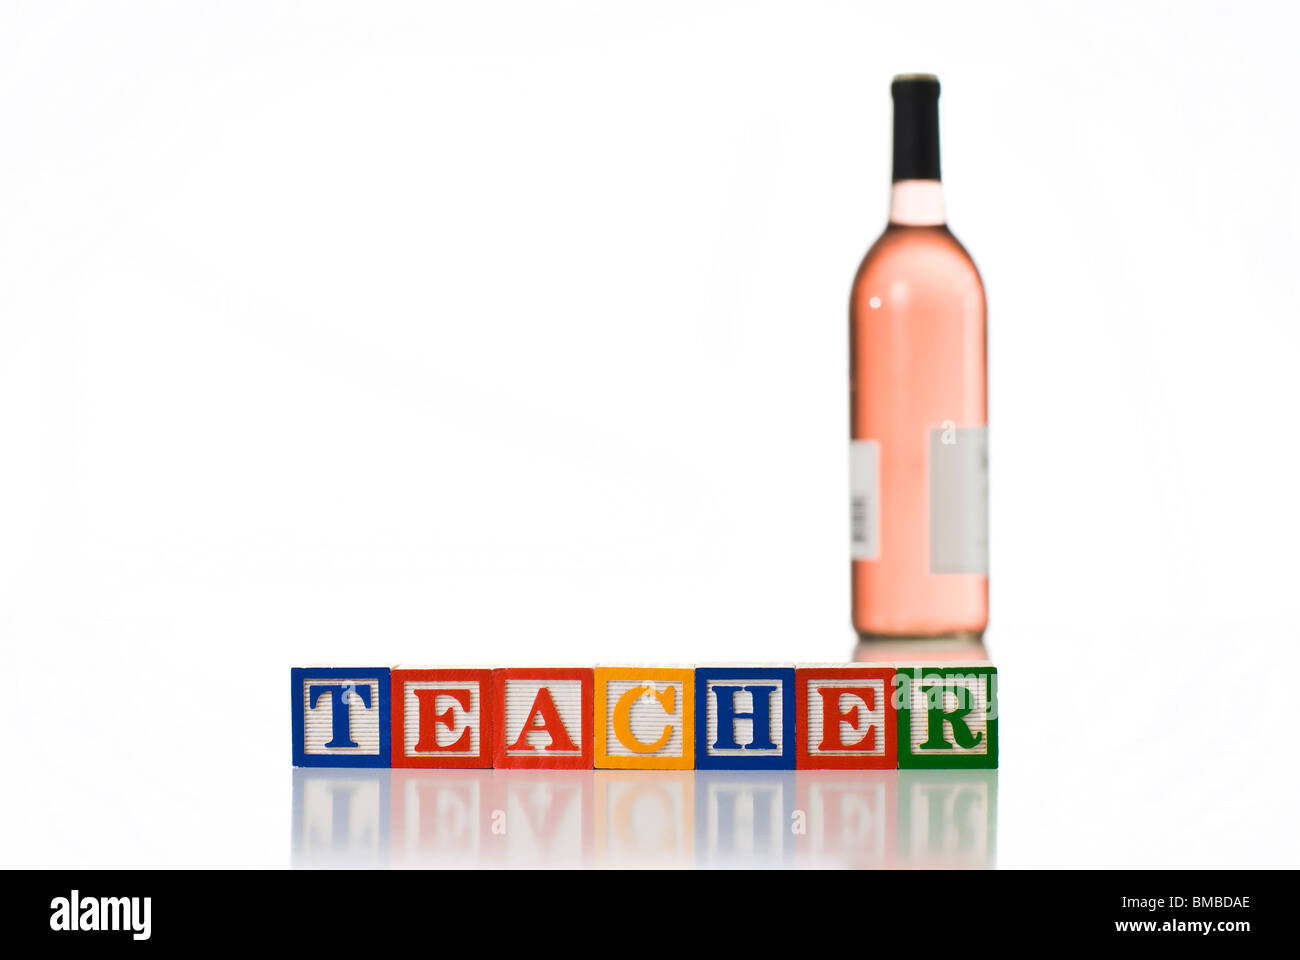 Colorful children's blocks spelling TEACHER with a bottle of wine Stock Photo